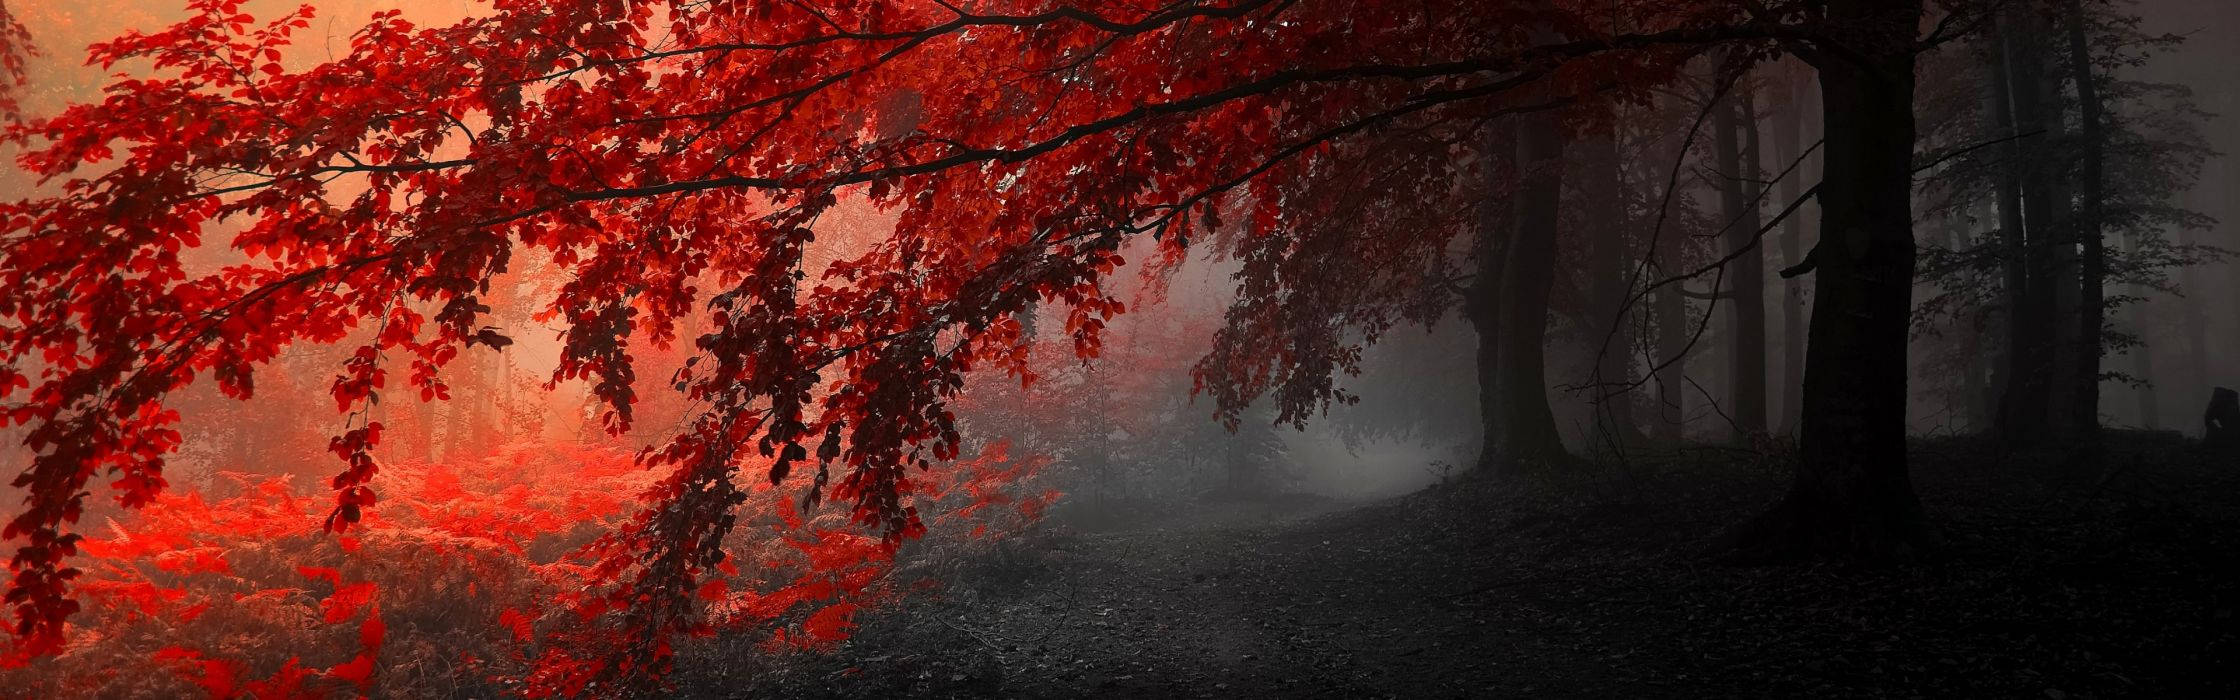 Enjoy the beauty of fall on two screens Wallpaper